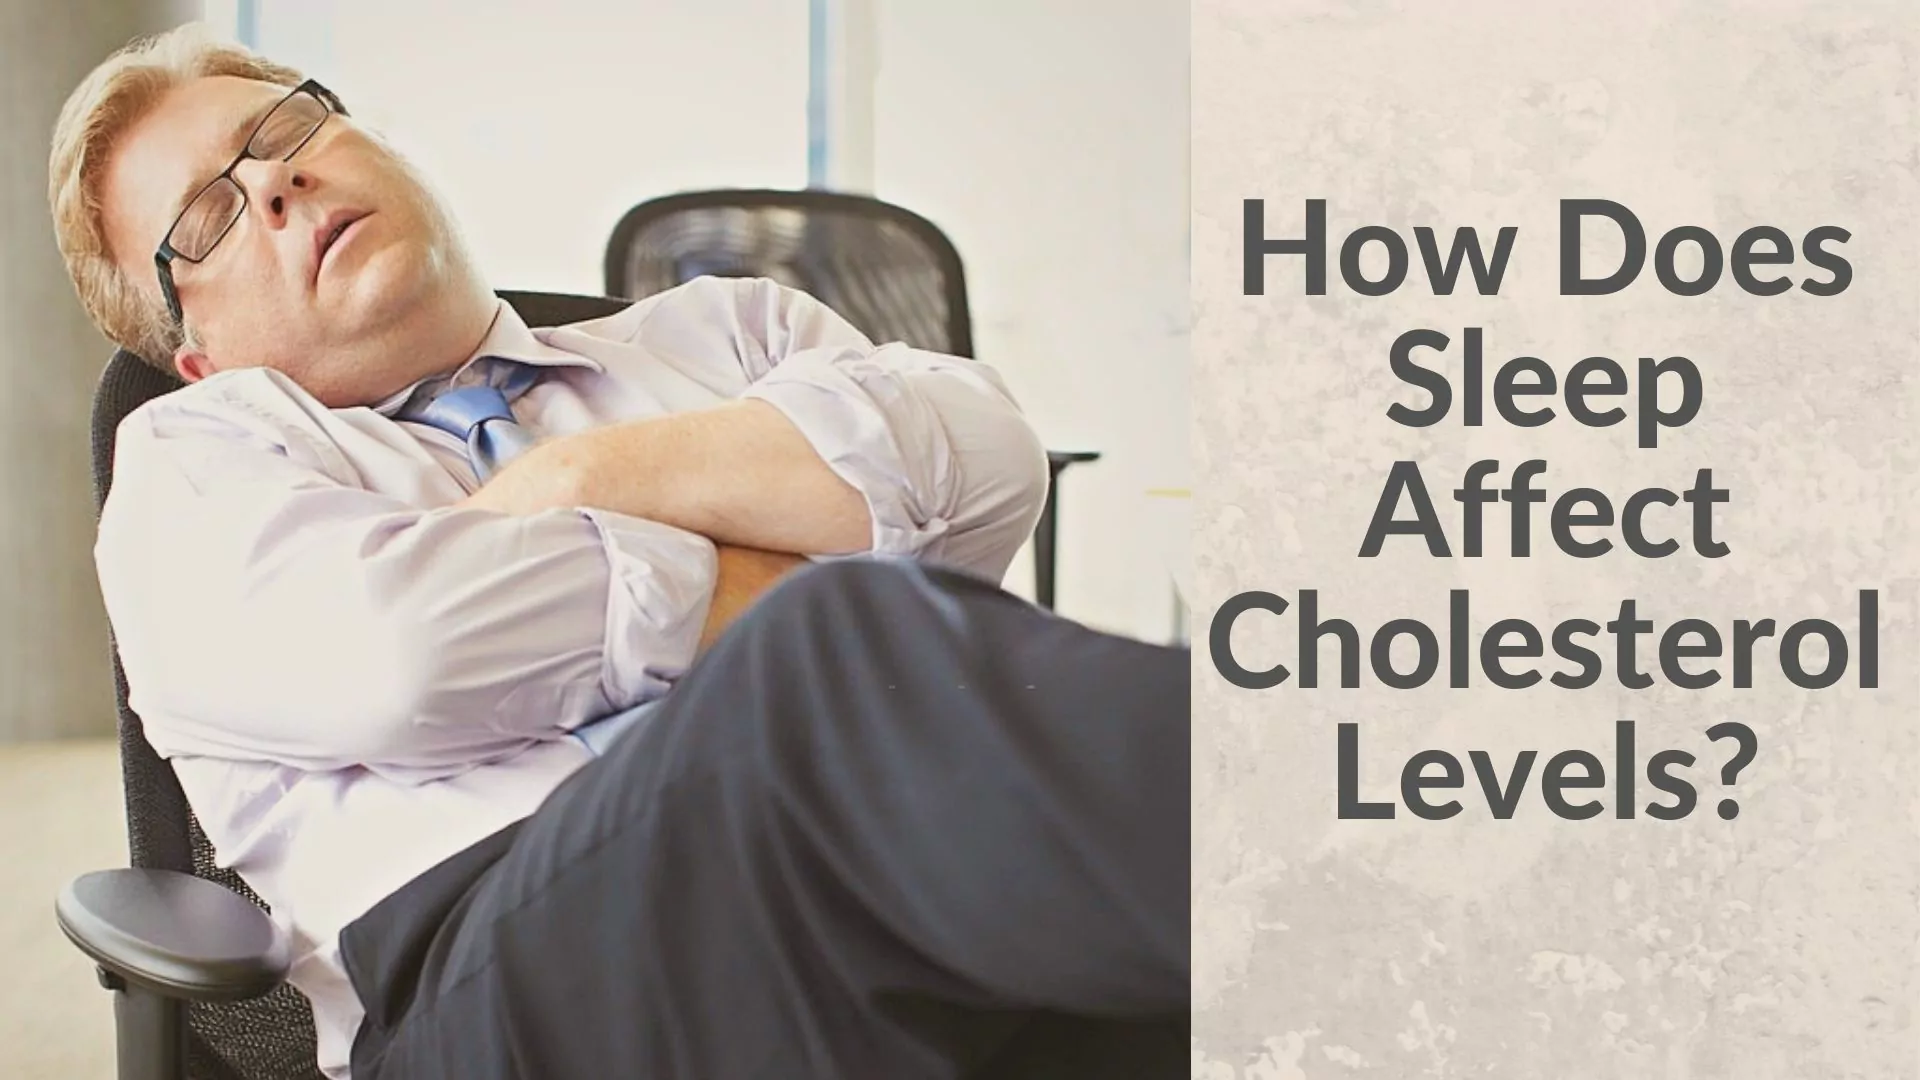 How Does Sleep Affect Cholesterol Levels